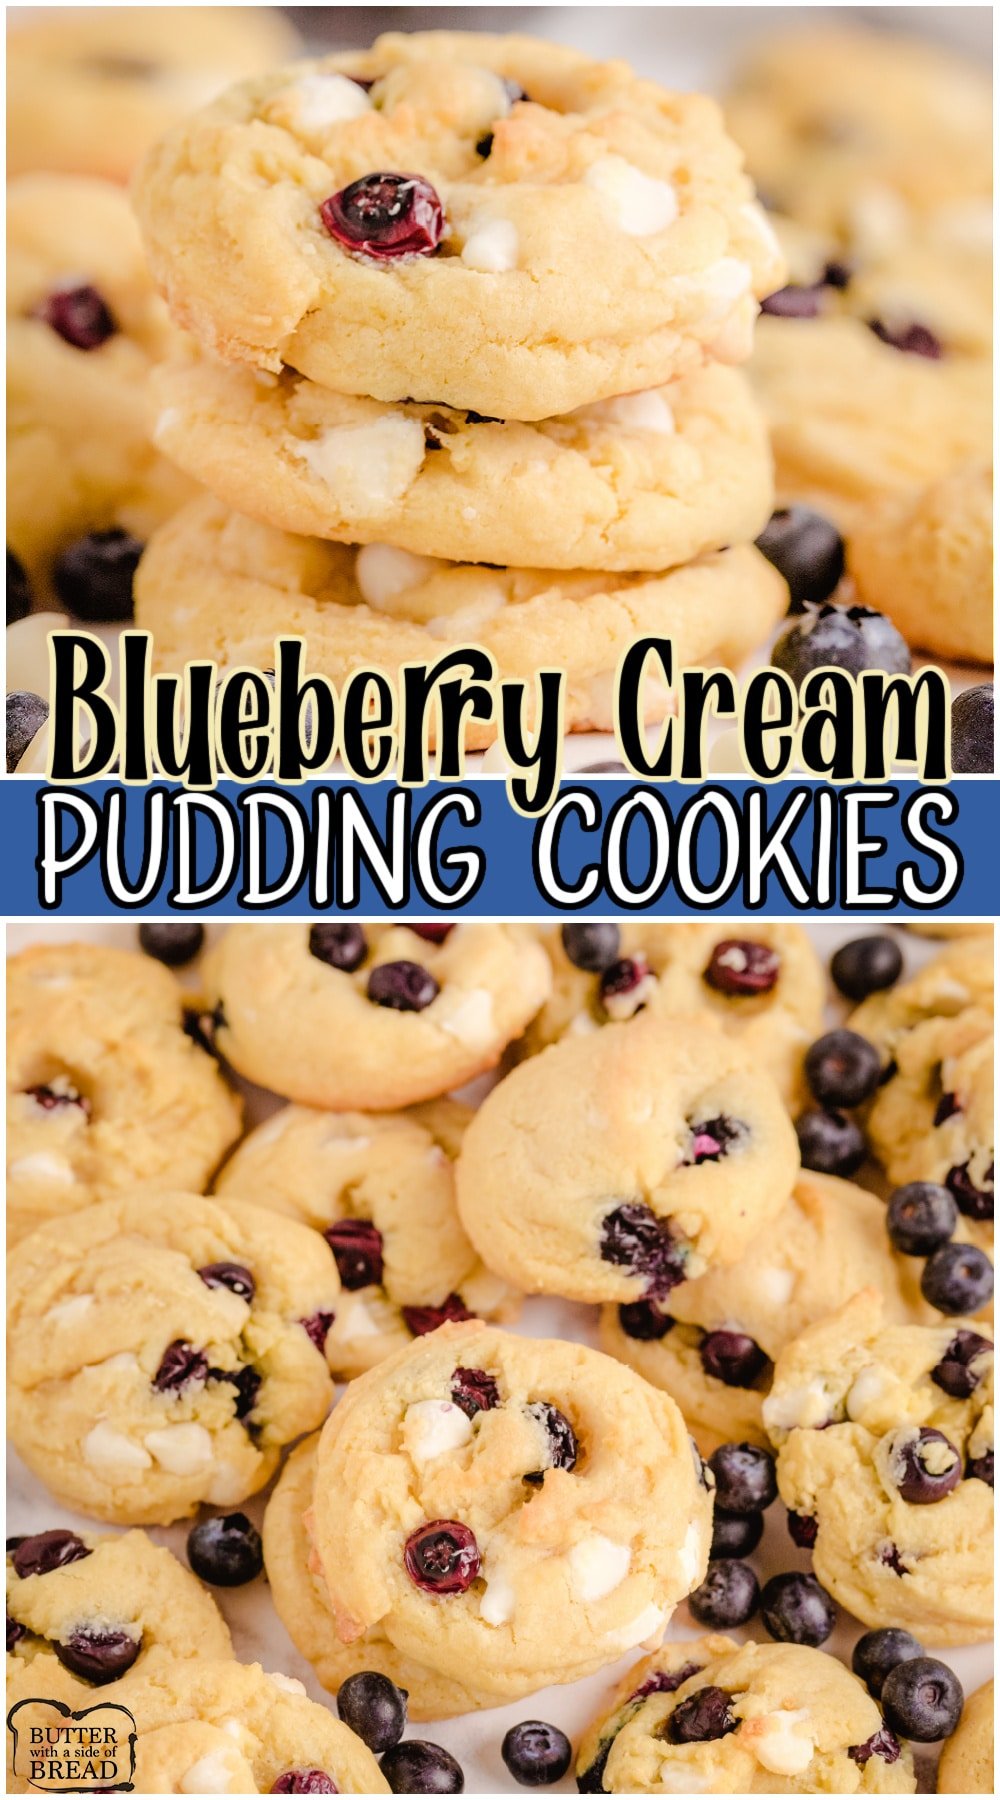 Blueberry Cream Cookies are soft vanilla pudding cookies with fantastic blueberry flavor! White chocolate chips + fresh blueberries are baked right into these amazing cookies.